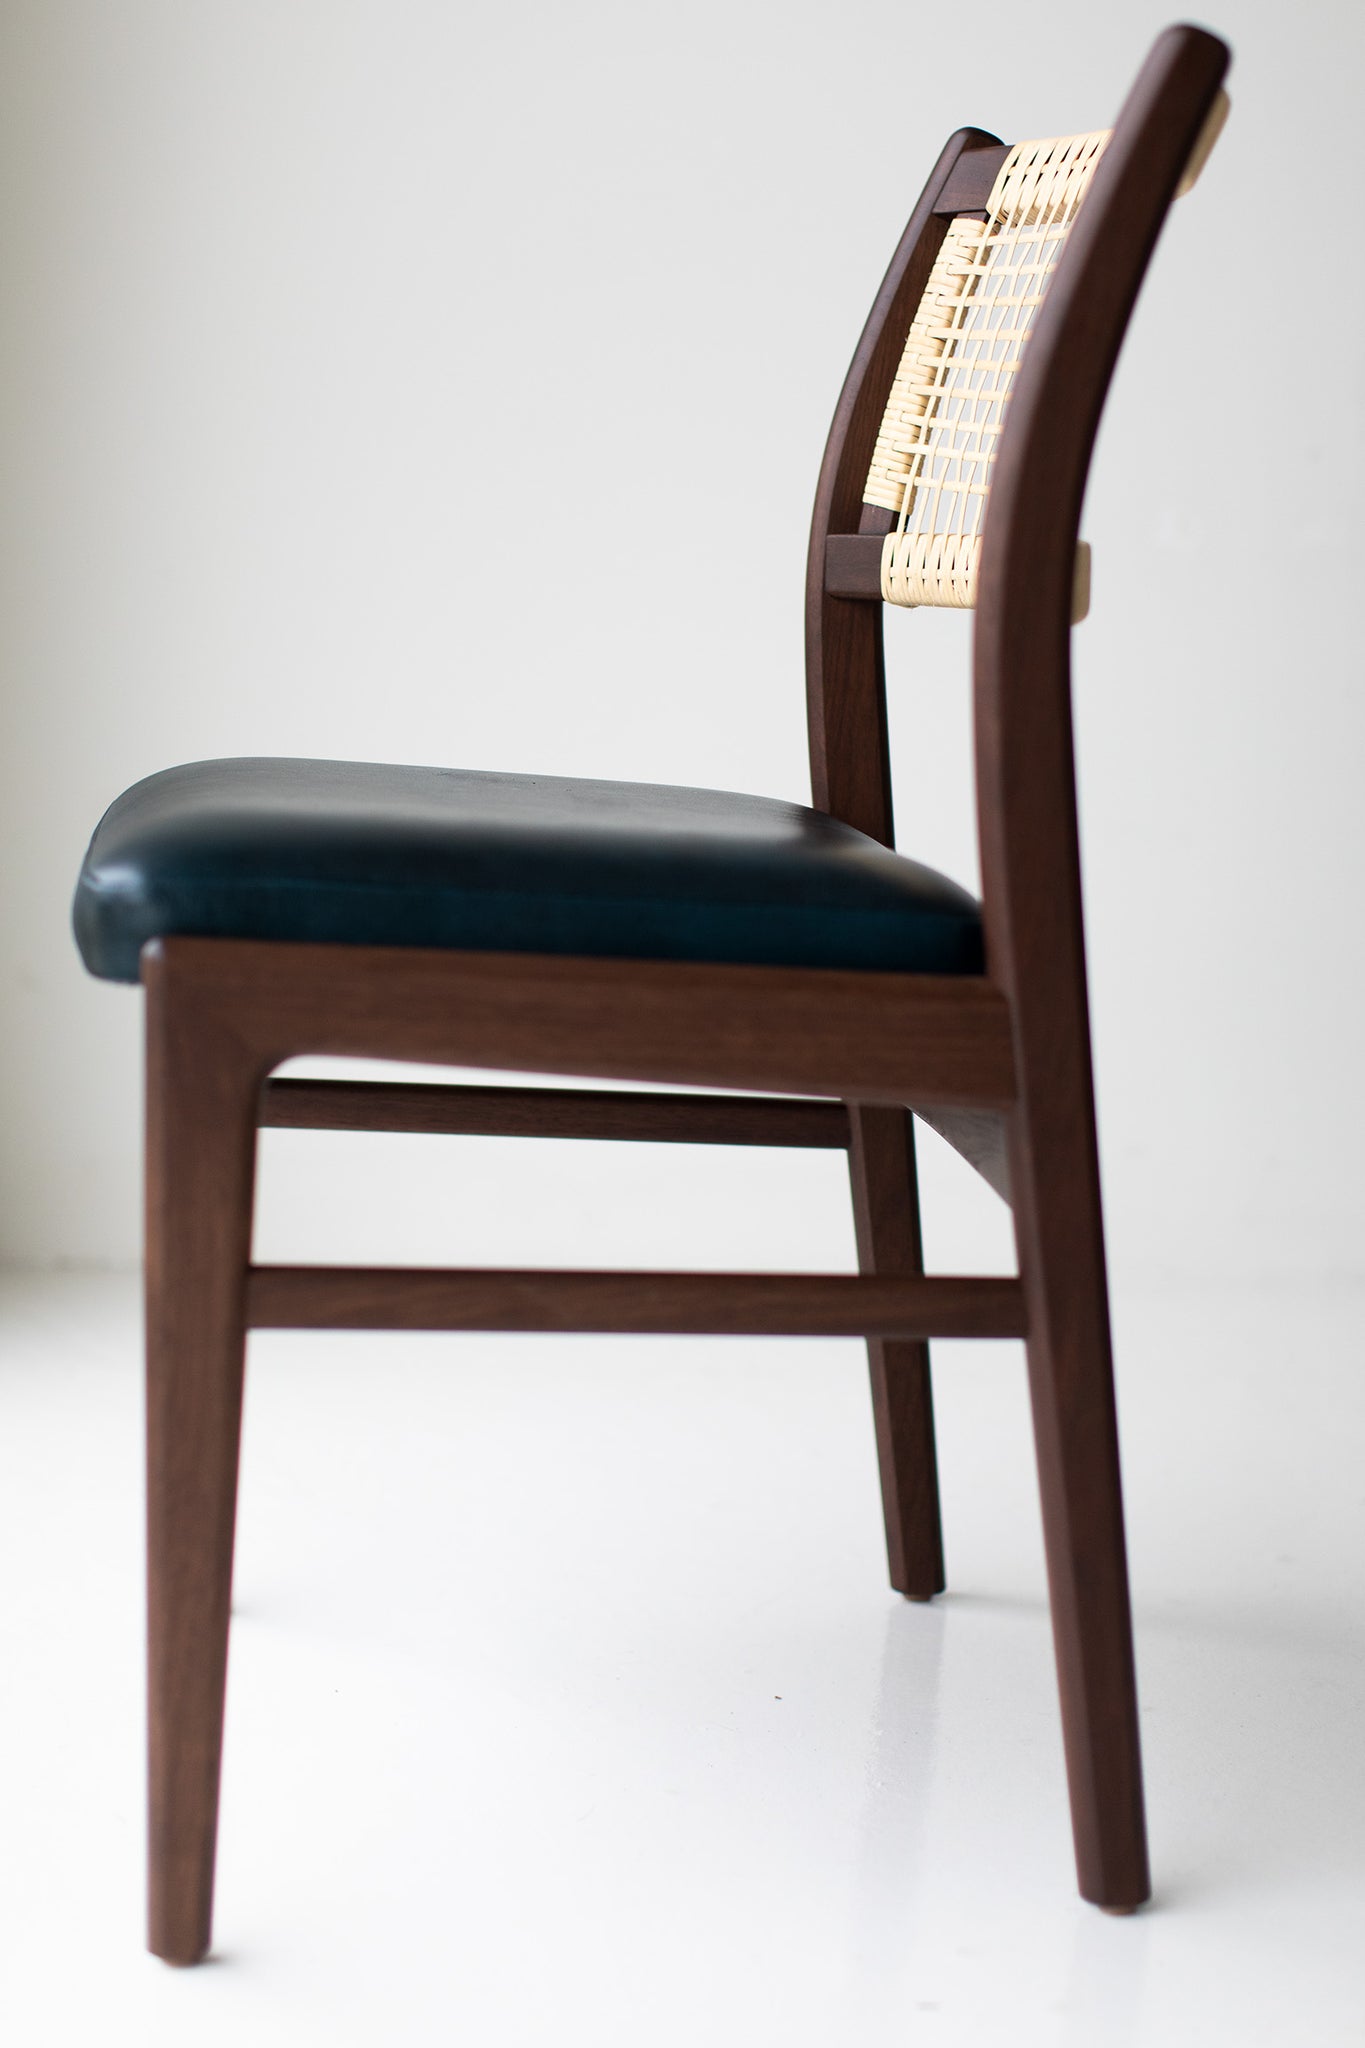 tribute-modern-dining-chair-t1002-02